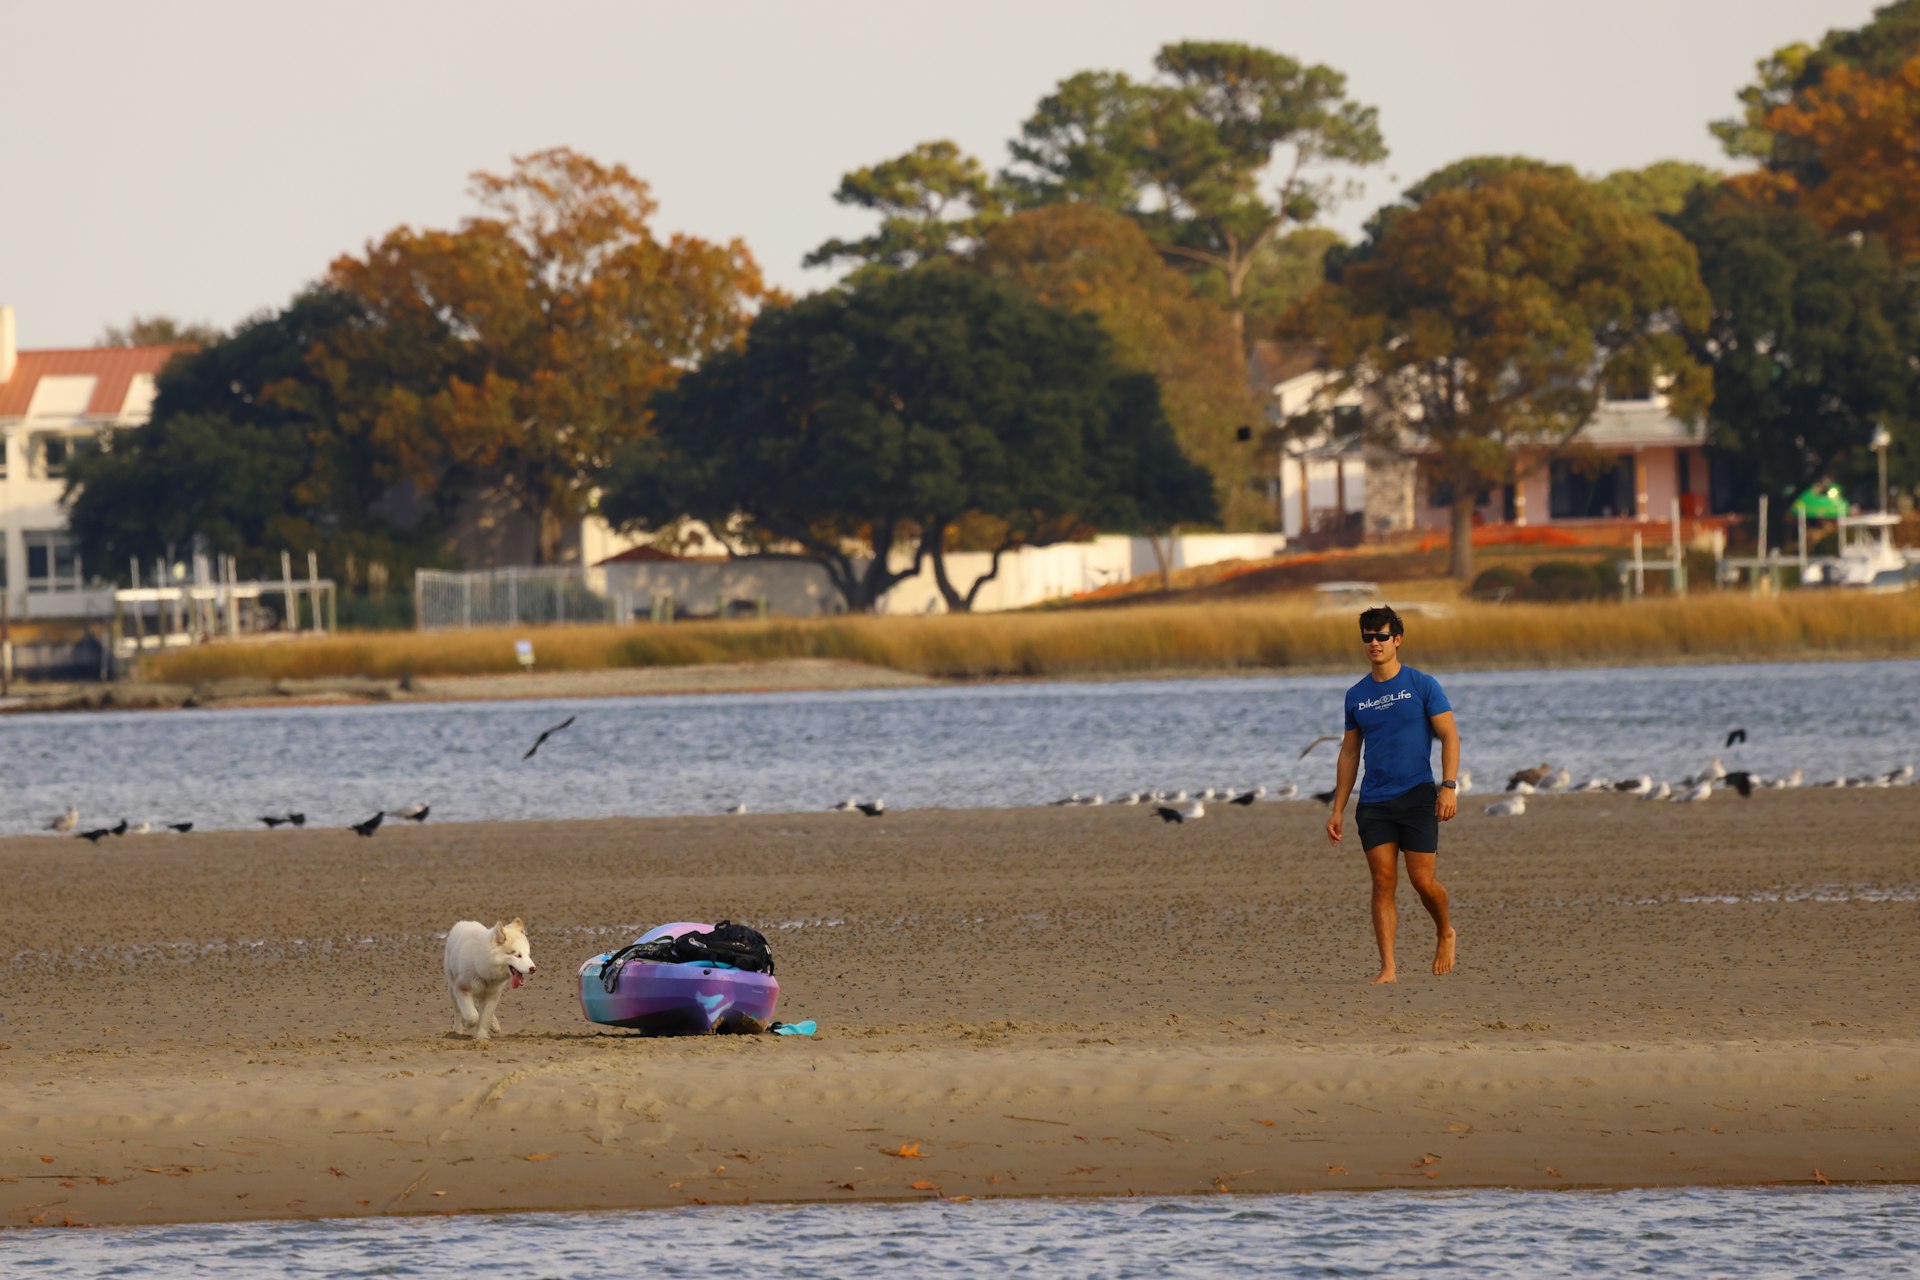 After paddling out to a sandbar and beaching his kayak, a young man enjoys playing with his dog on a a nice autumn afternoon